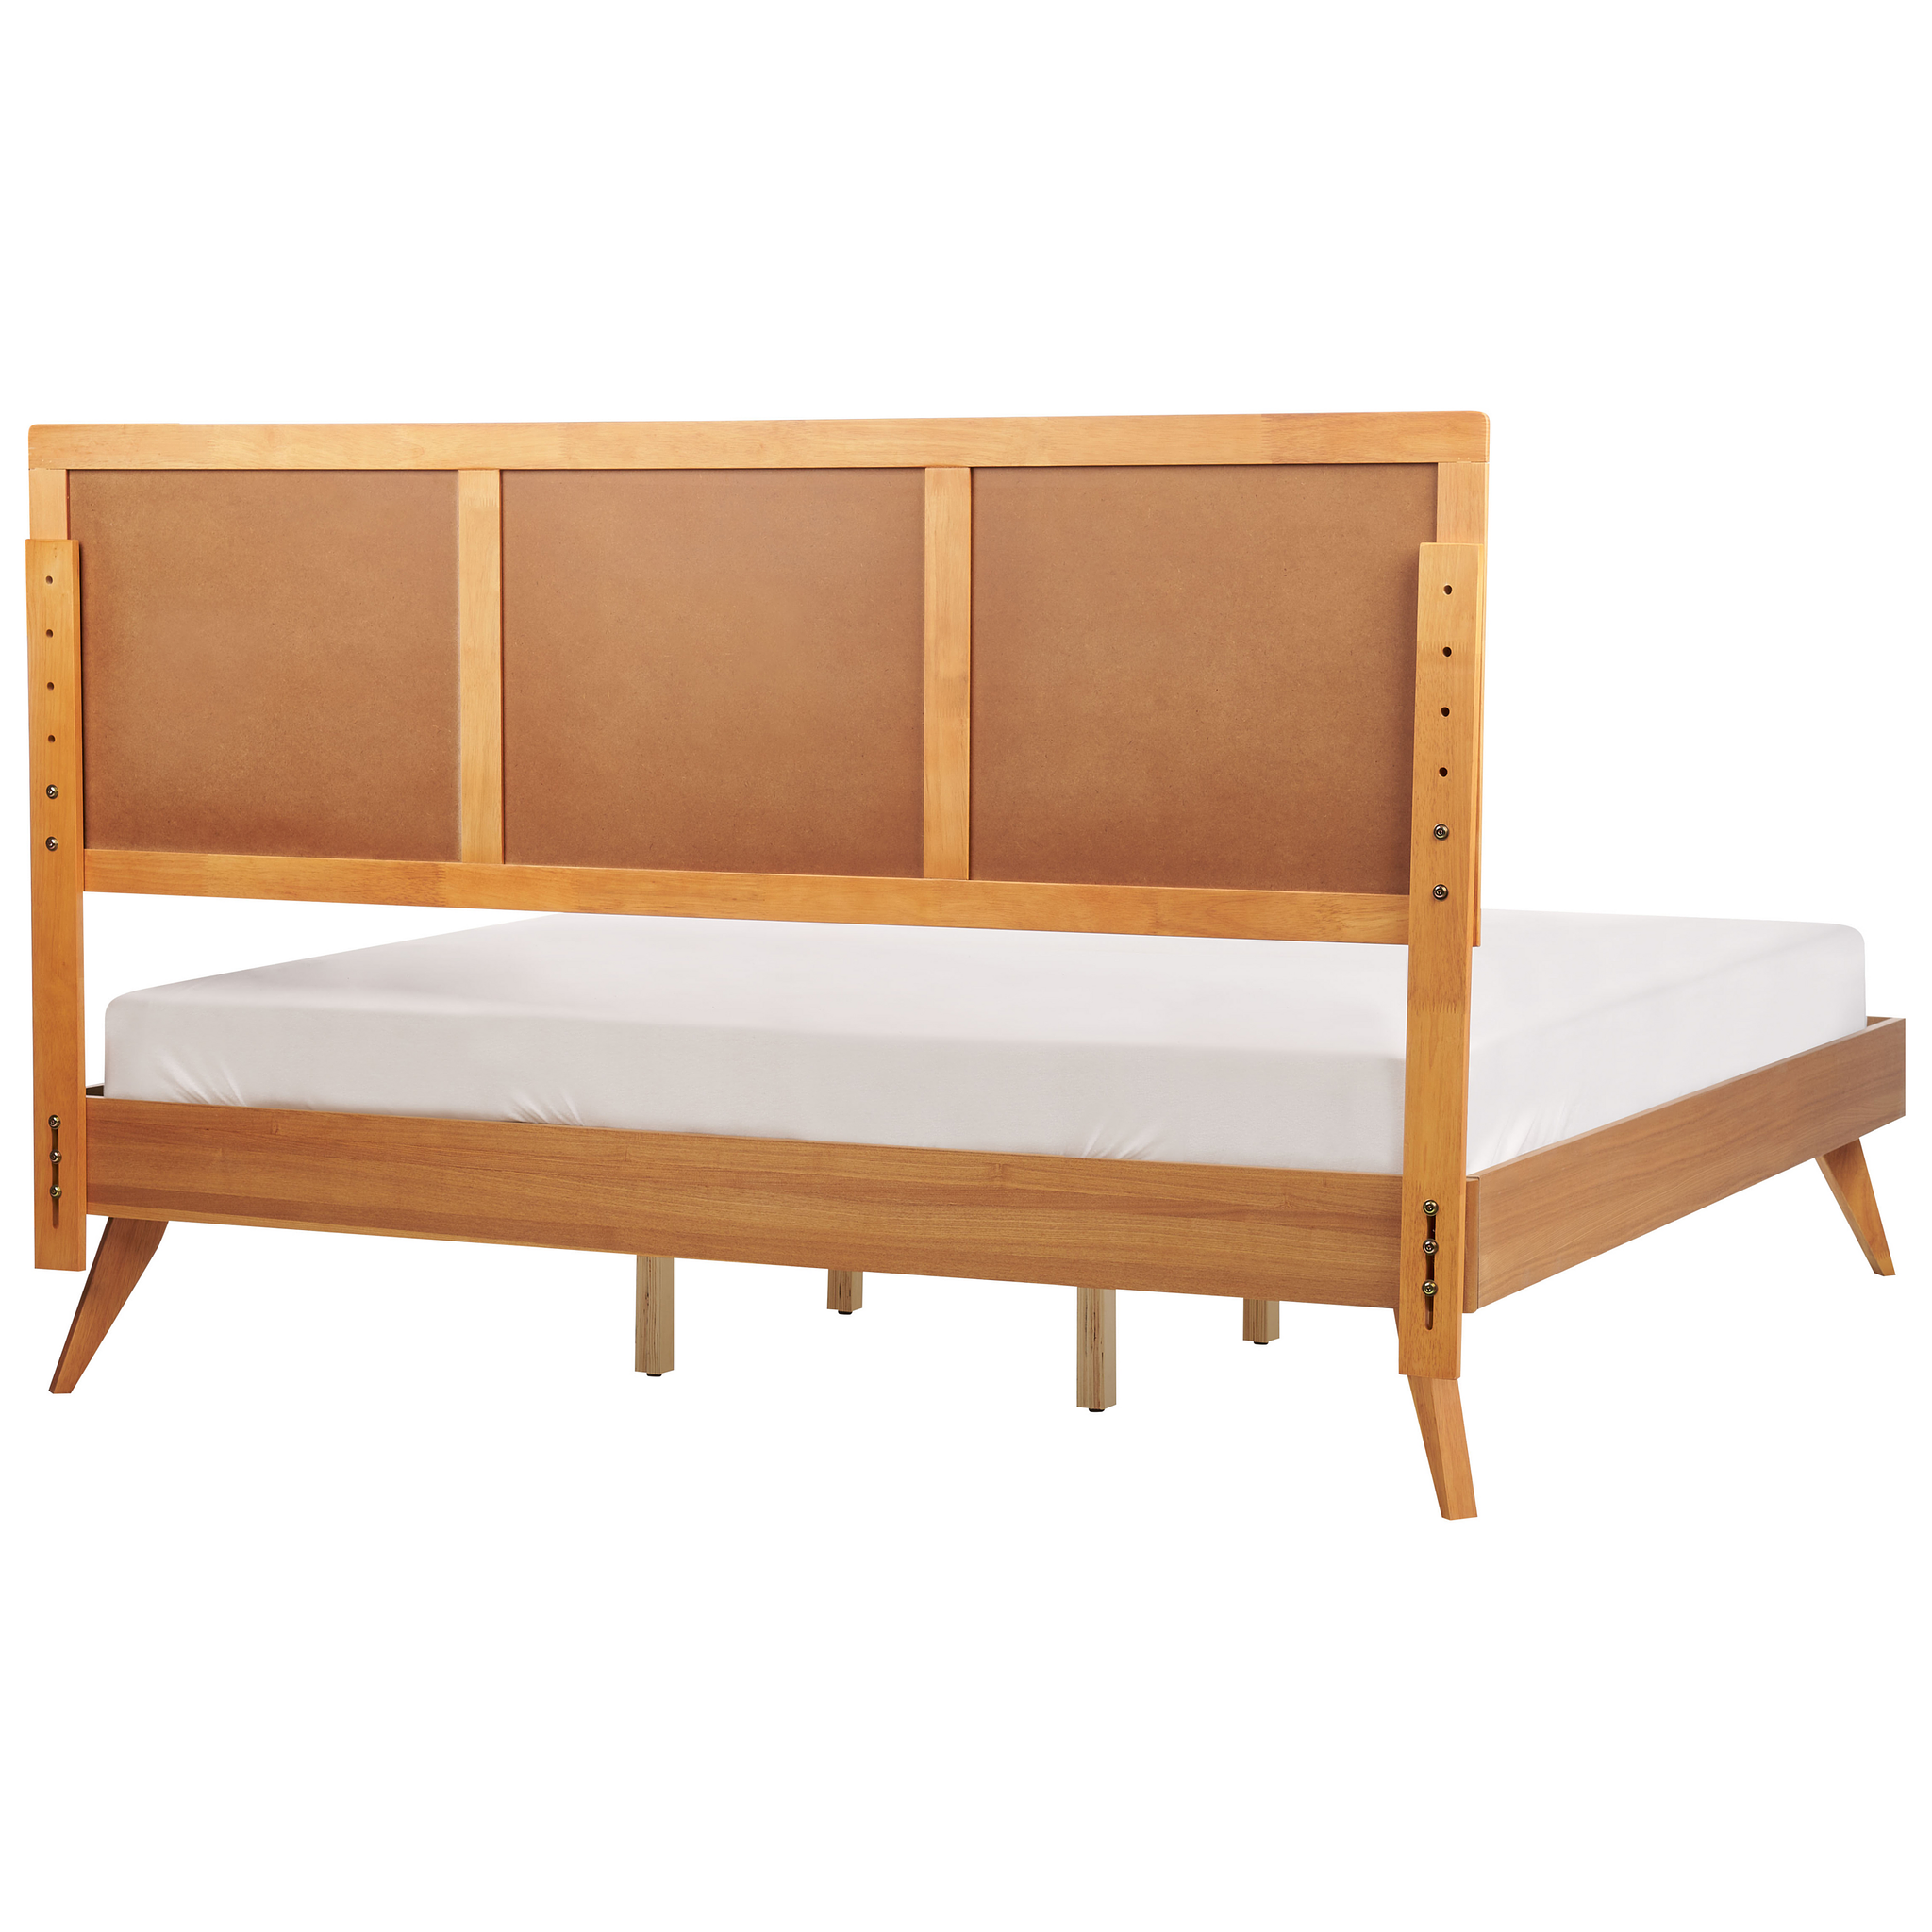 Beliani ISTRES - Tweepersoonsbed - Lichthout - 180 x 200 cm - MDF